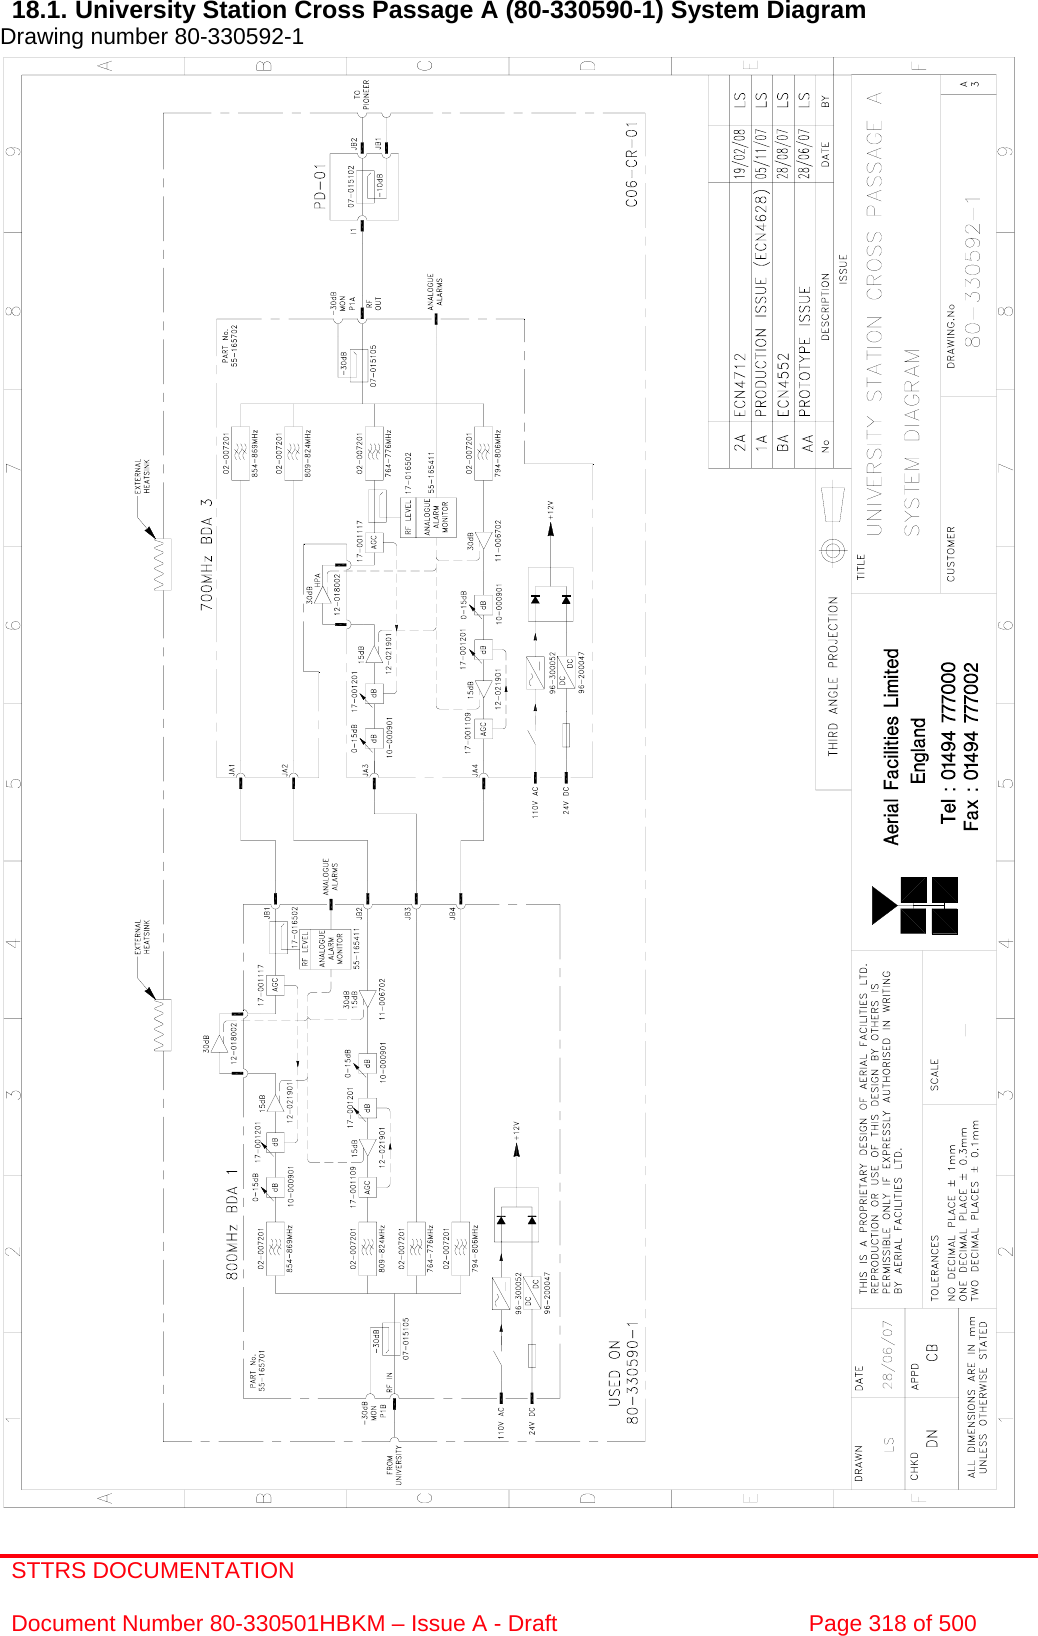 STTRS DOCUMENTATION  Document Number 80-330501HBKM – Issue A - Draft  Page 318 of 500   18.1. University Station Cross Passage A (80-330590-1) System Diagram Drawing number 80-330592-1                                                       